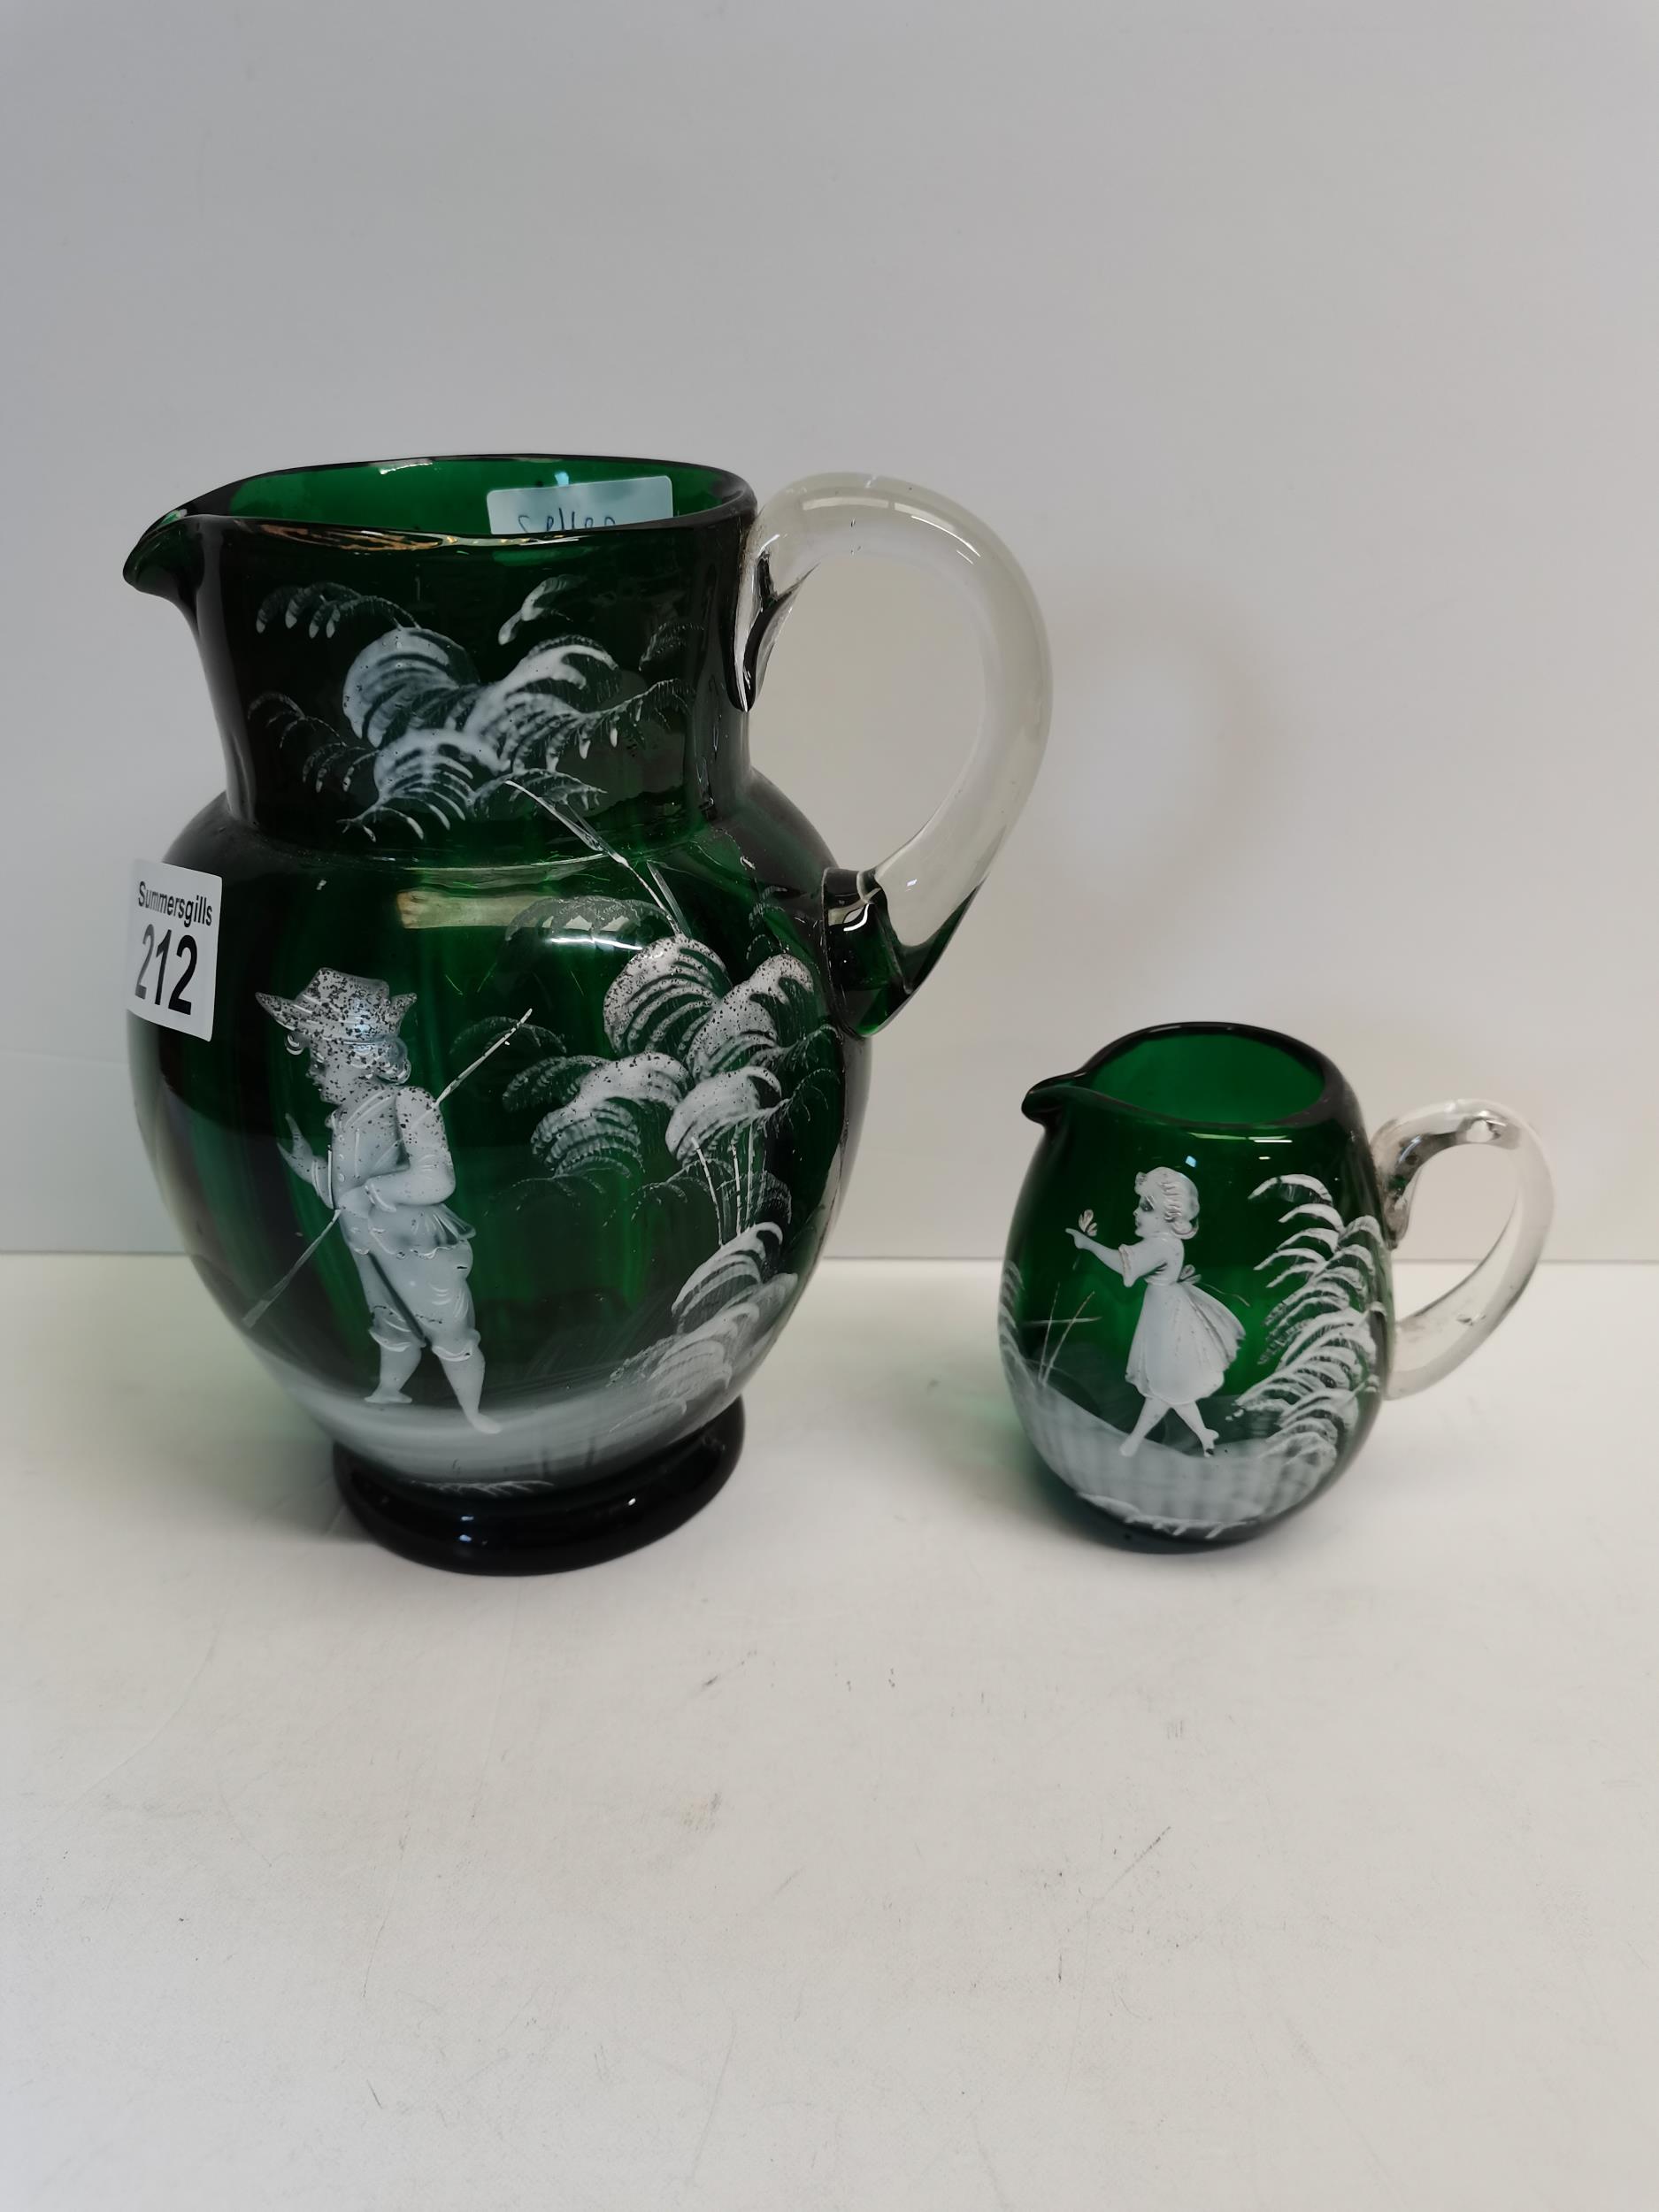 x2 Mary Gregory glass jugs